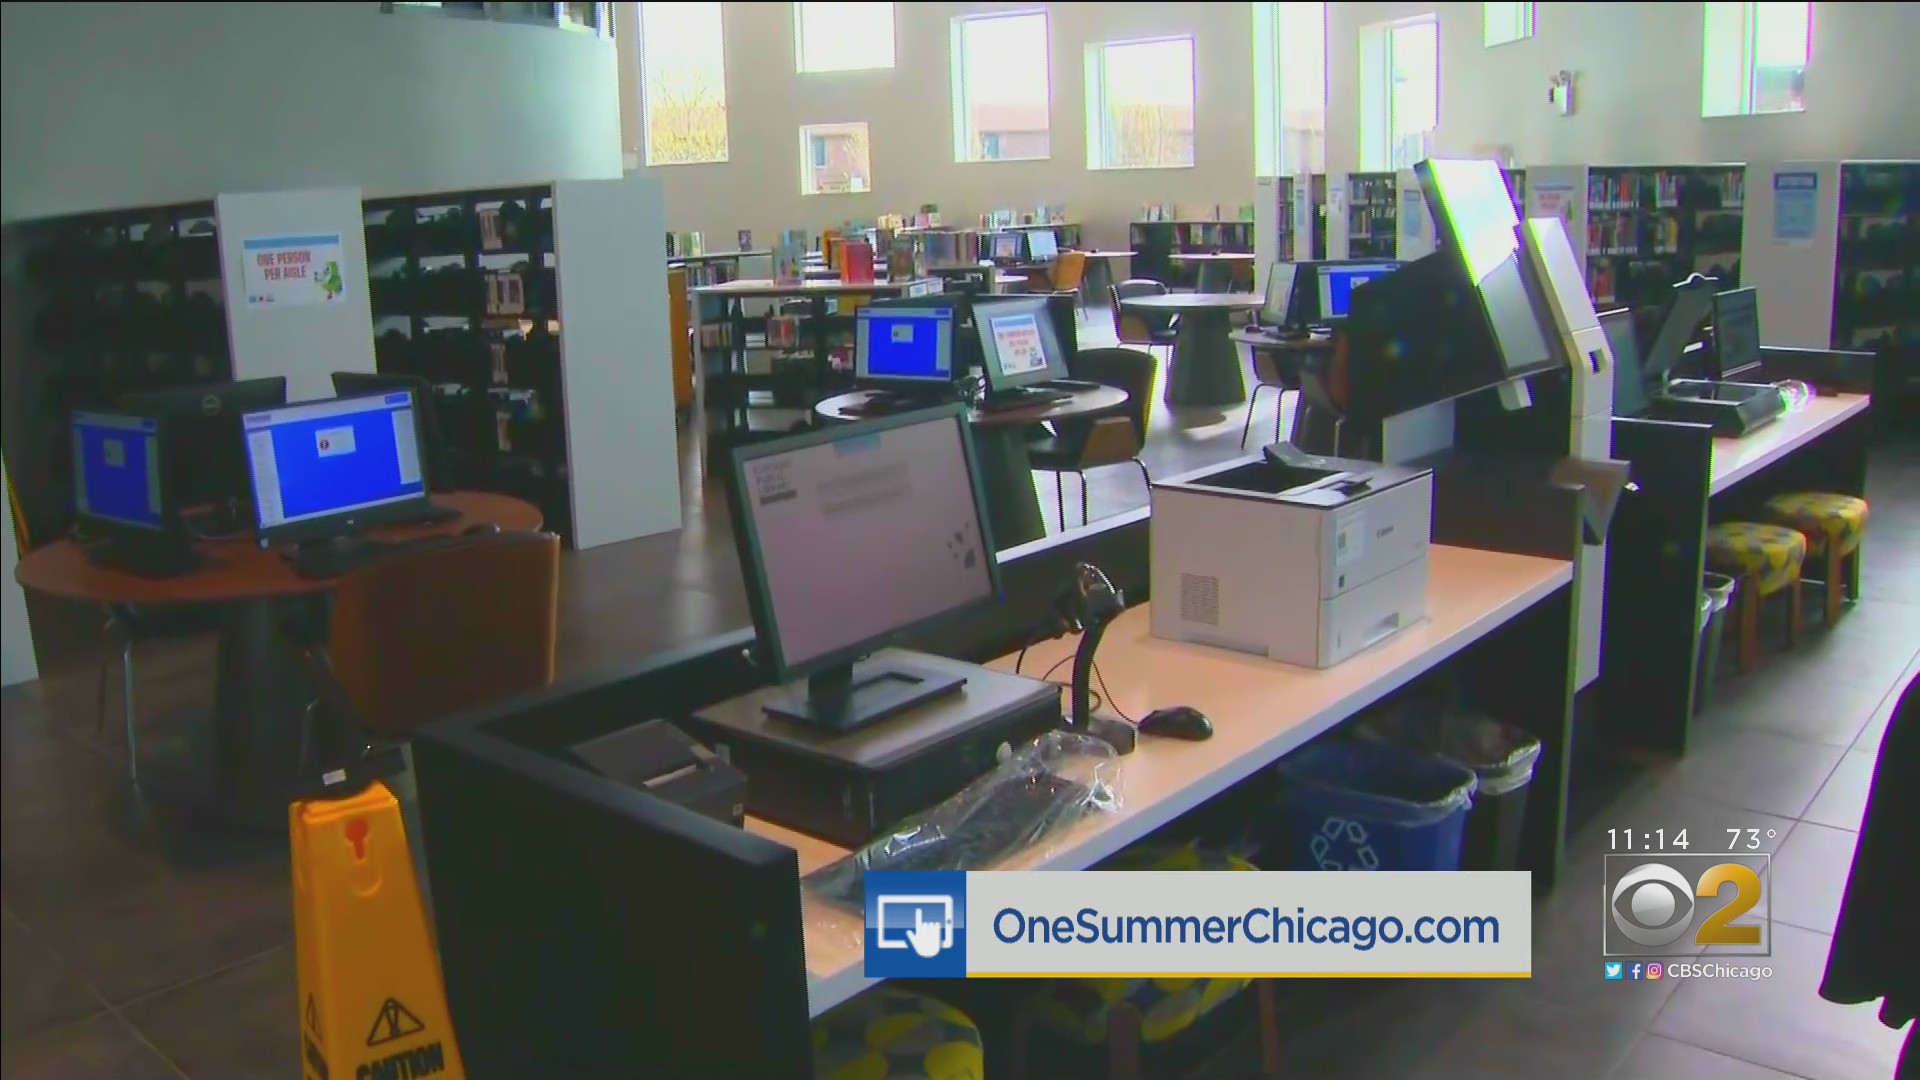 Mayor Lightfoot Opens South Side Library, Announces Start Of ‘One Summer Chicago’ – CBS Chicago